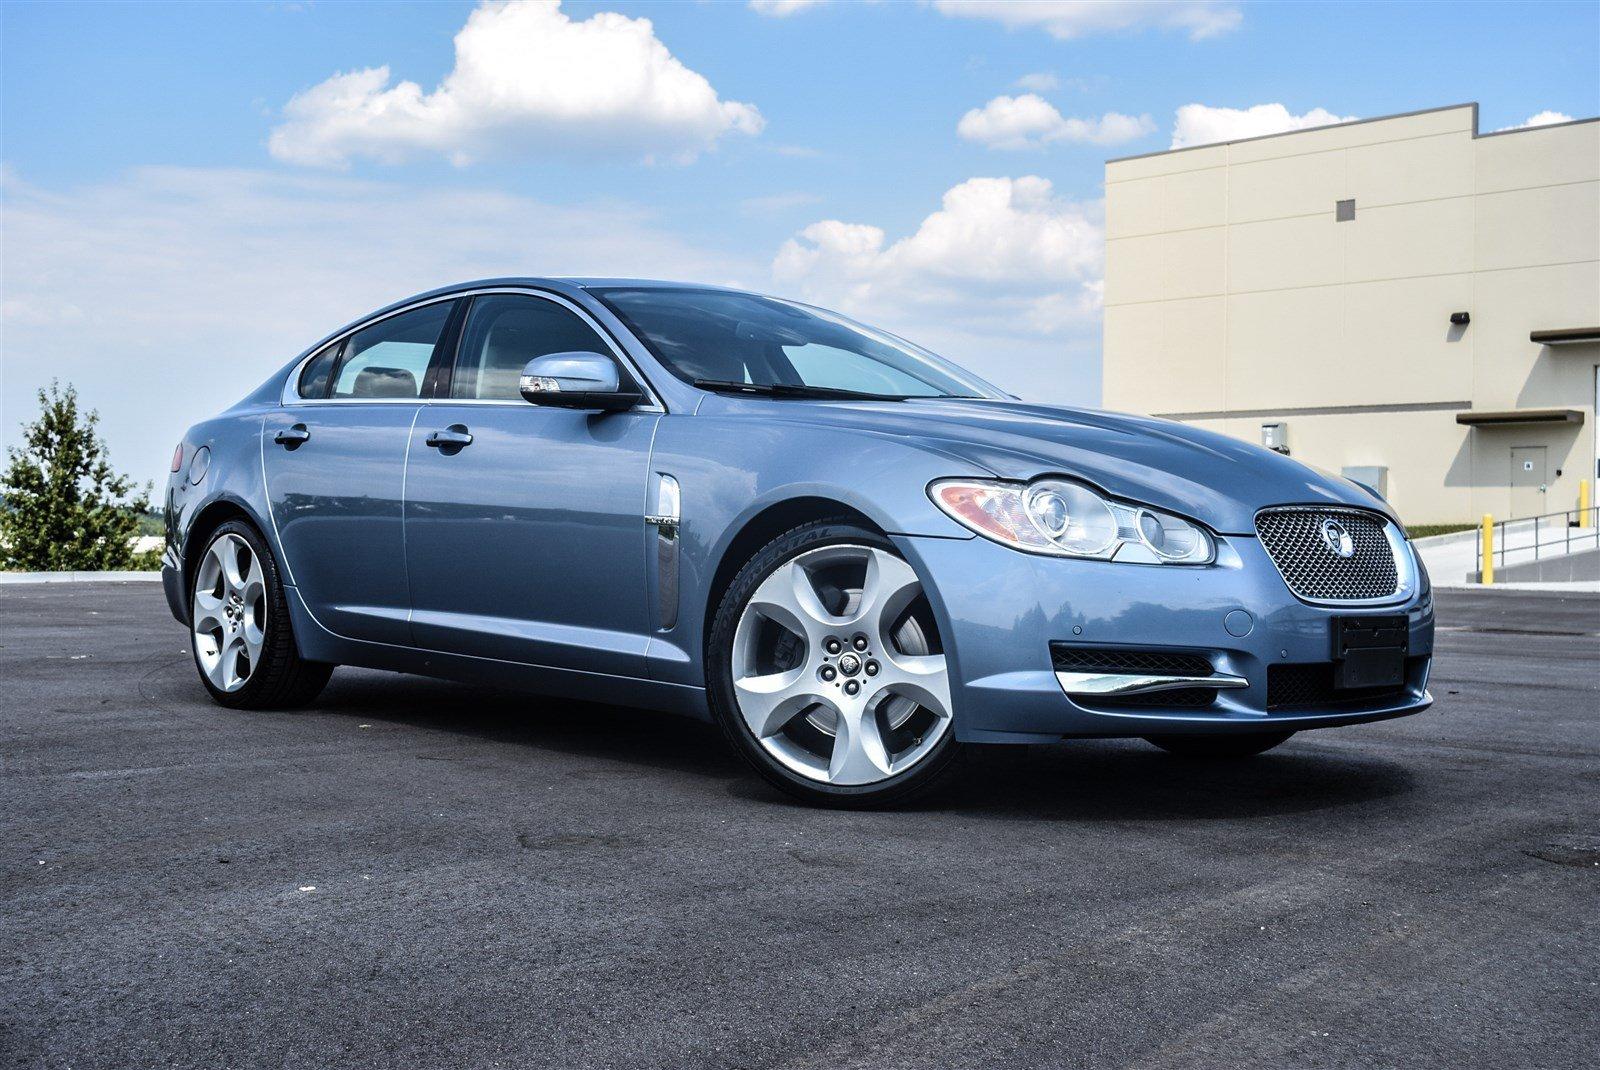 Used 2009 Jaguar XF Supercharged for sale Sold at Gravity Autos Marietta in Marietta GA 30060 30